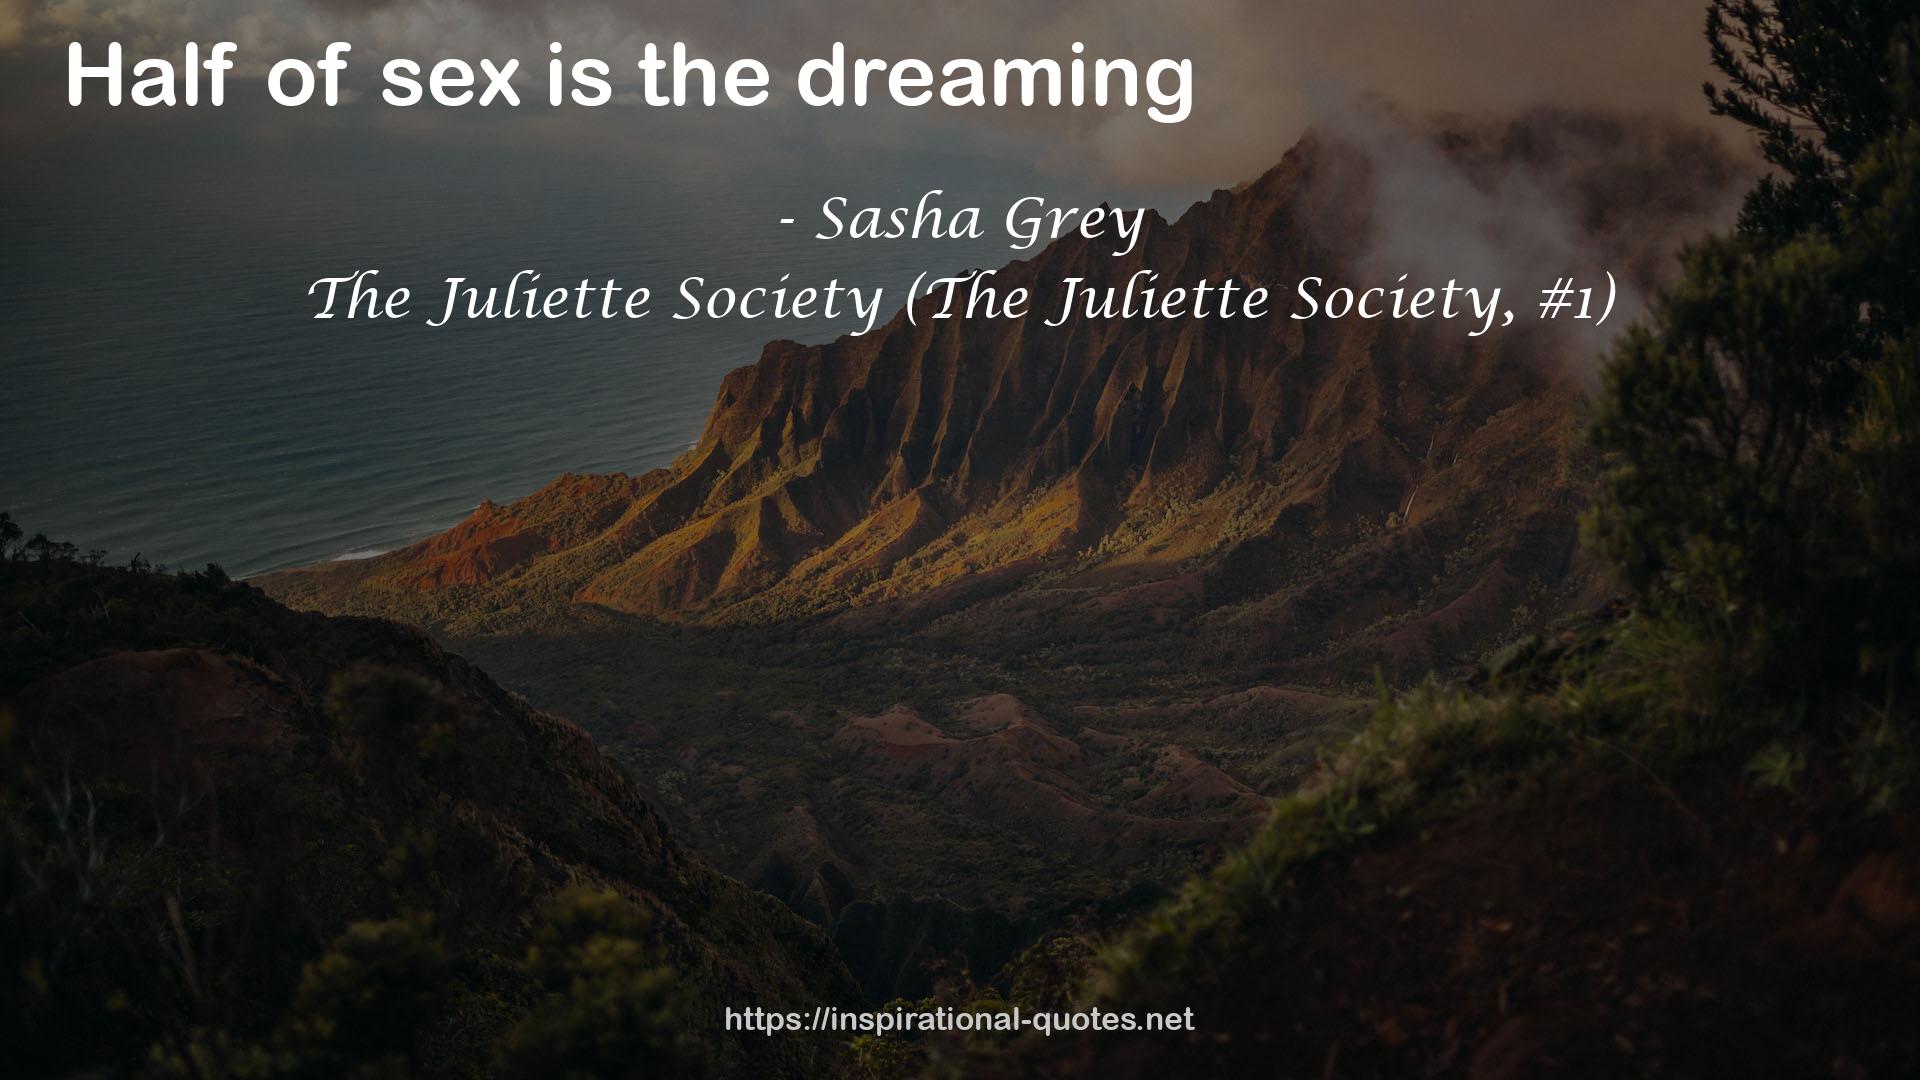 The Juliette Society (The Juliette Society, #1) QUOTES